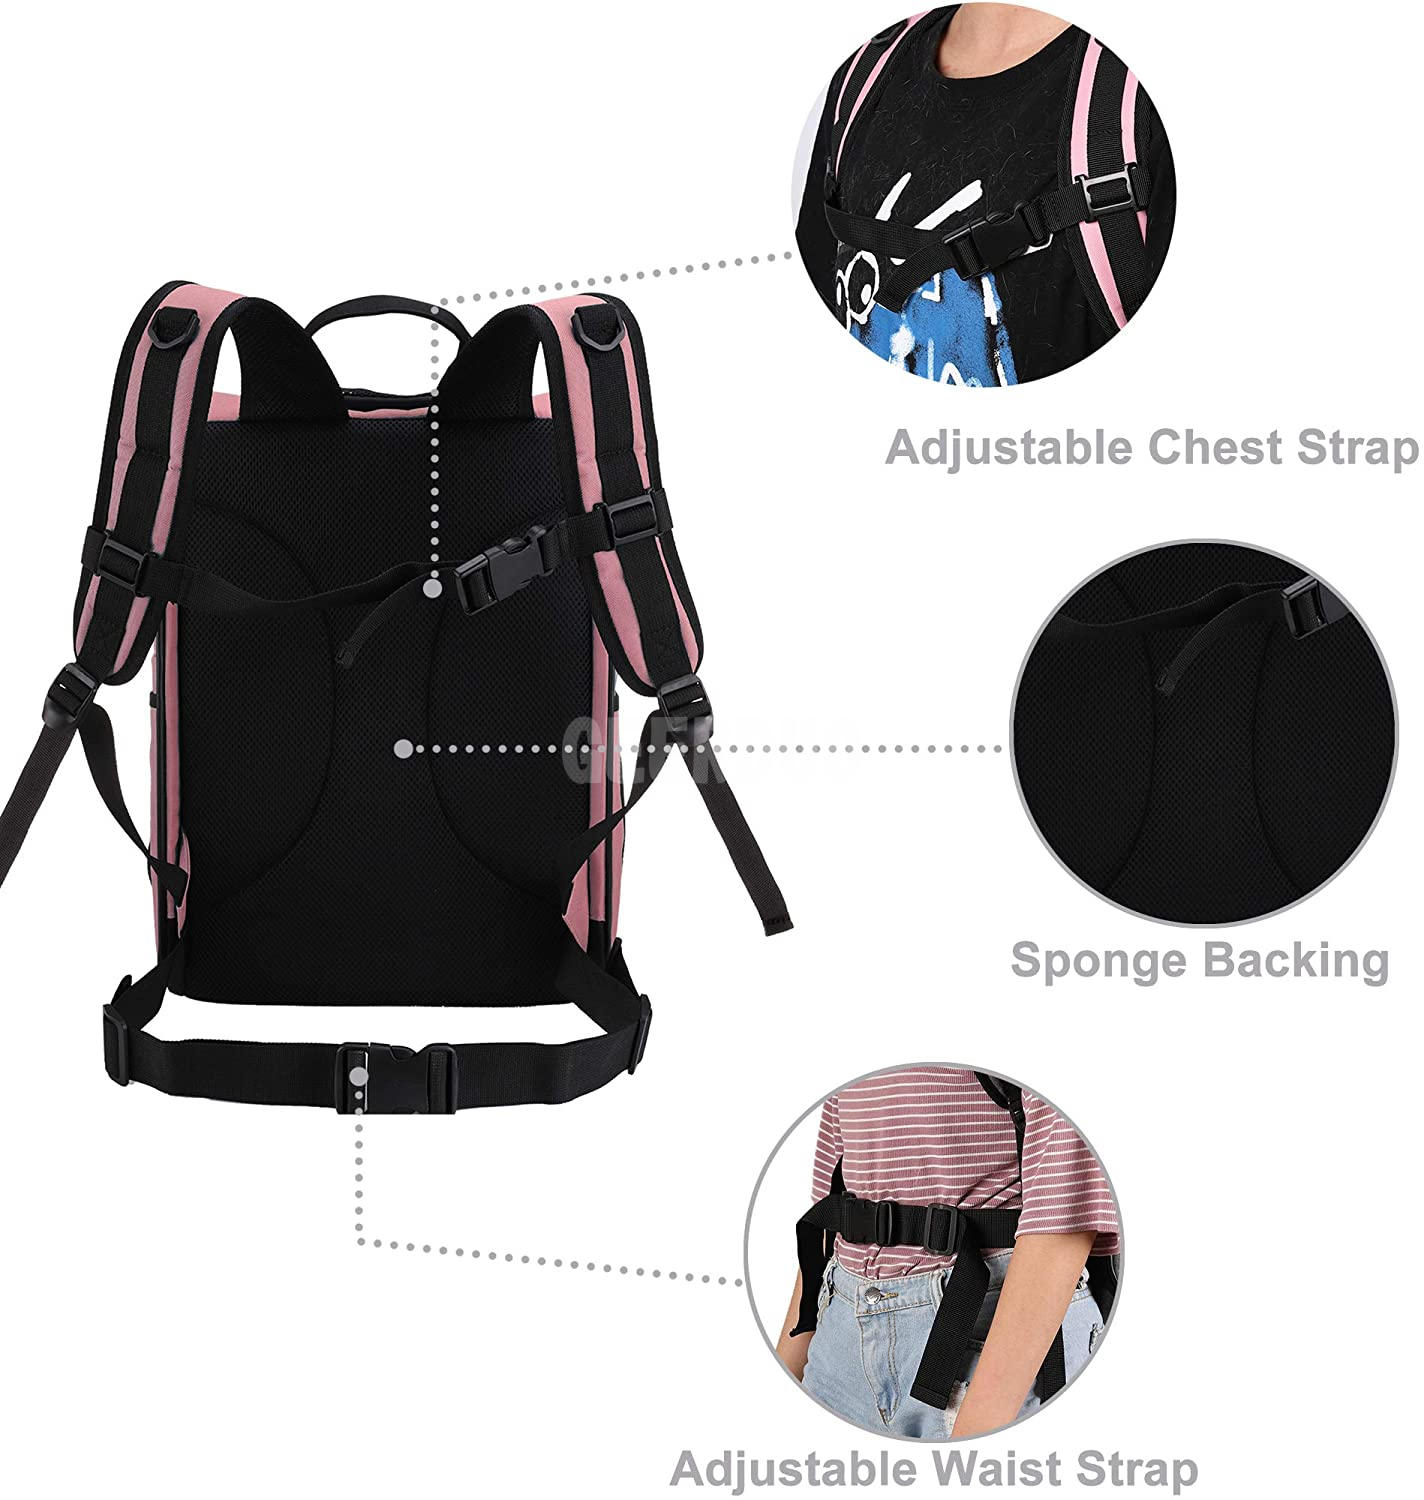 Pet Carrier Backpack for Large/Small Cats and Dogs GRDBB-5